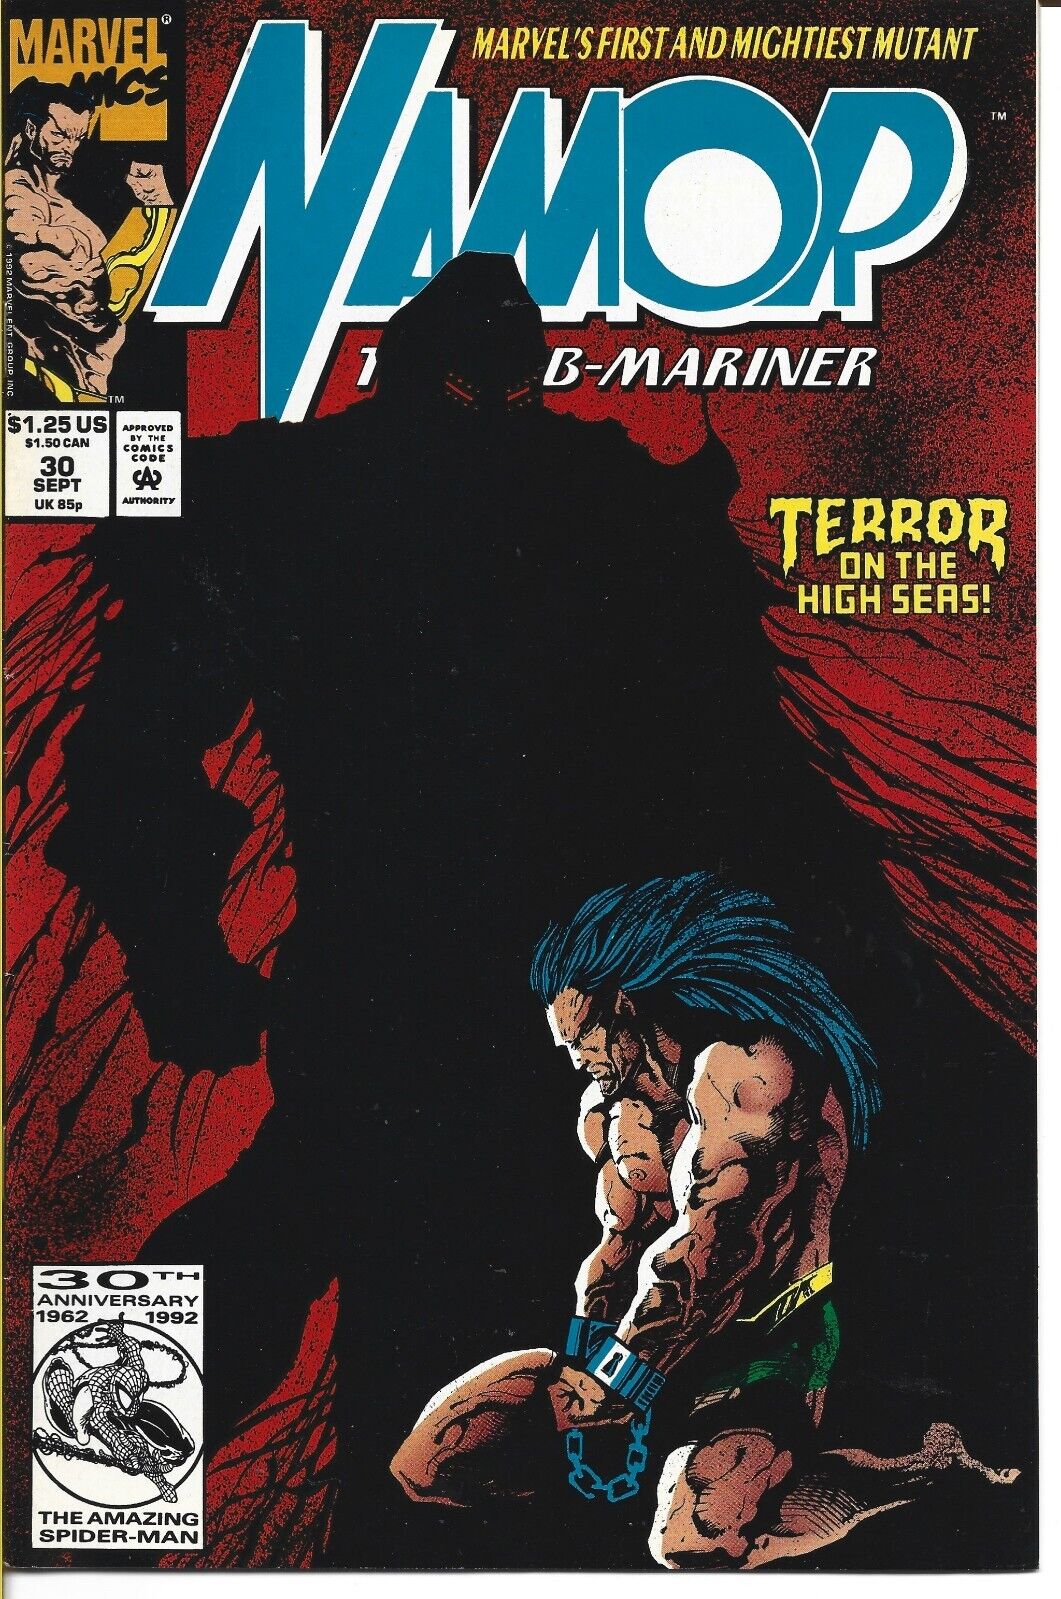 NAMOR THE SUB-MARINER #30 MARVEL COMICS 1992 BAGGED AND BOARDED